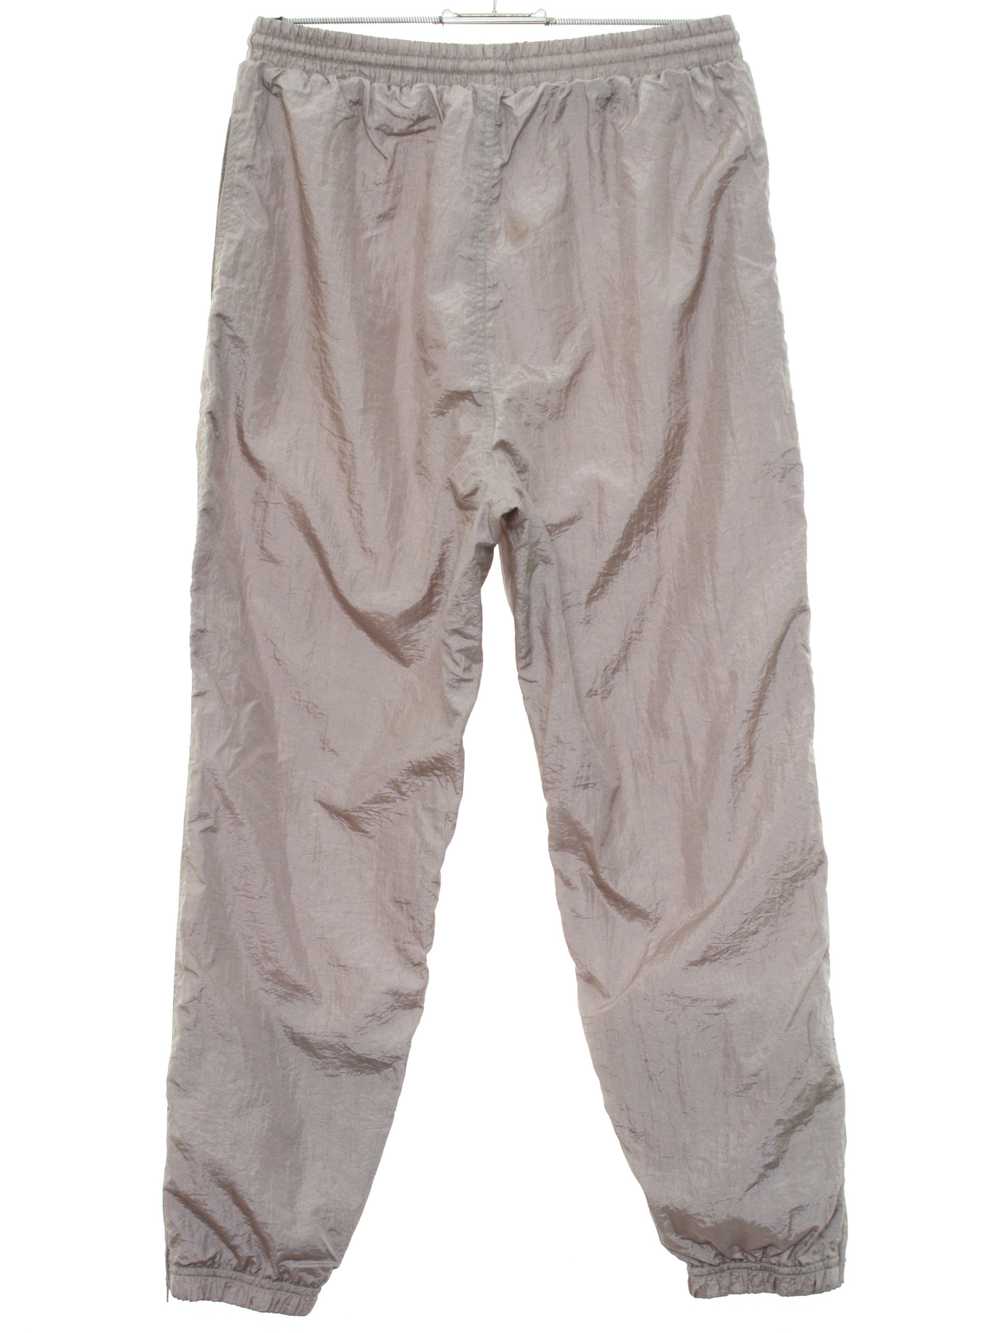 1980's Womens Baggy Totally 80s Nylon Track Pants - image 3